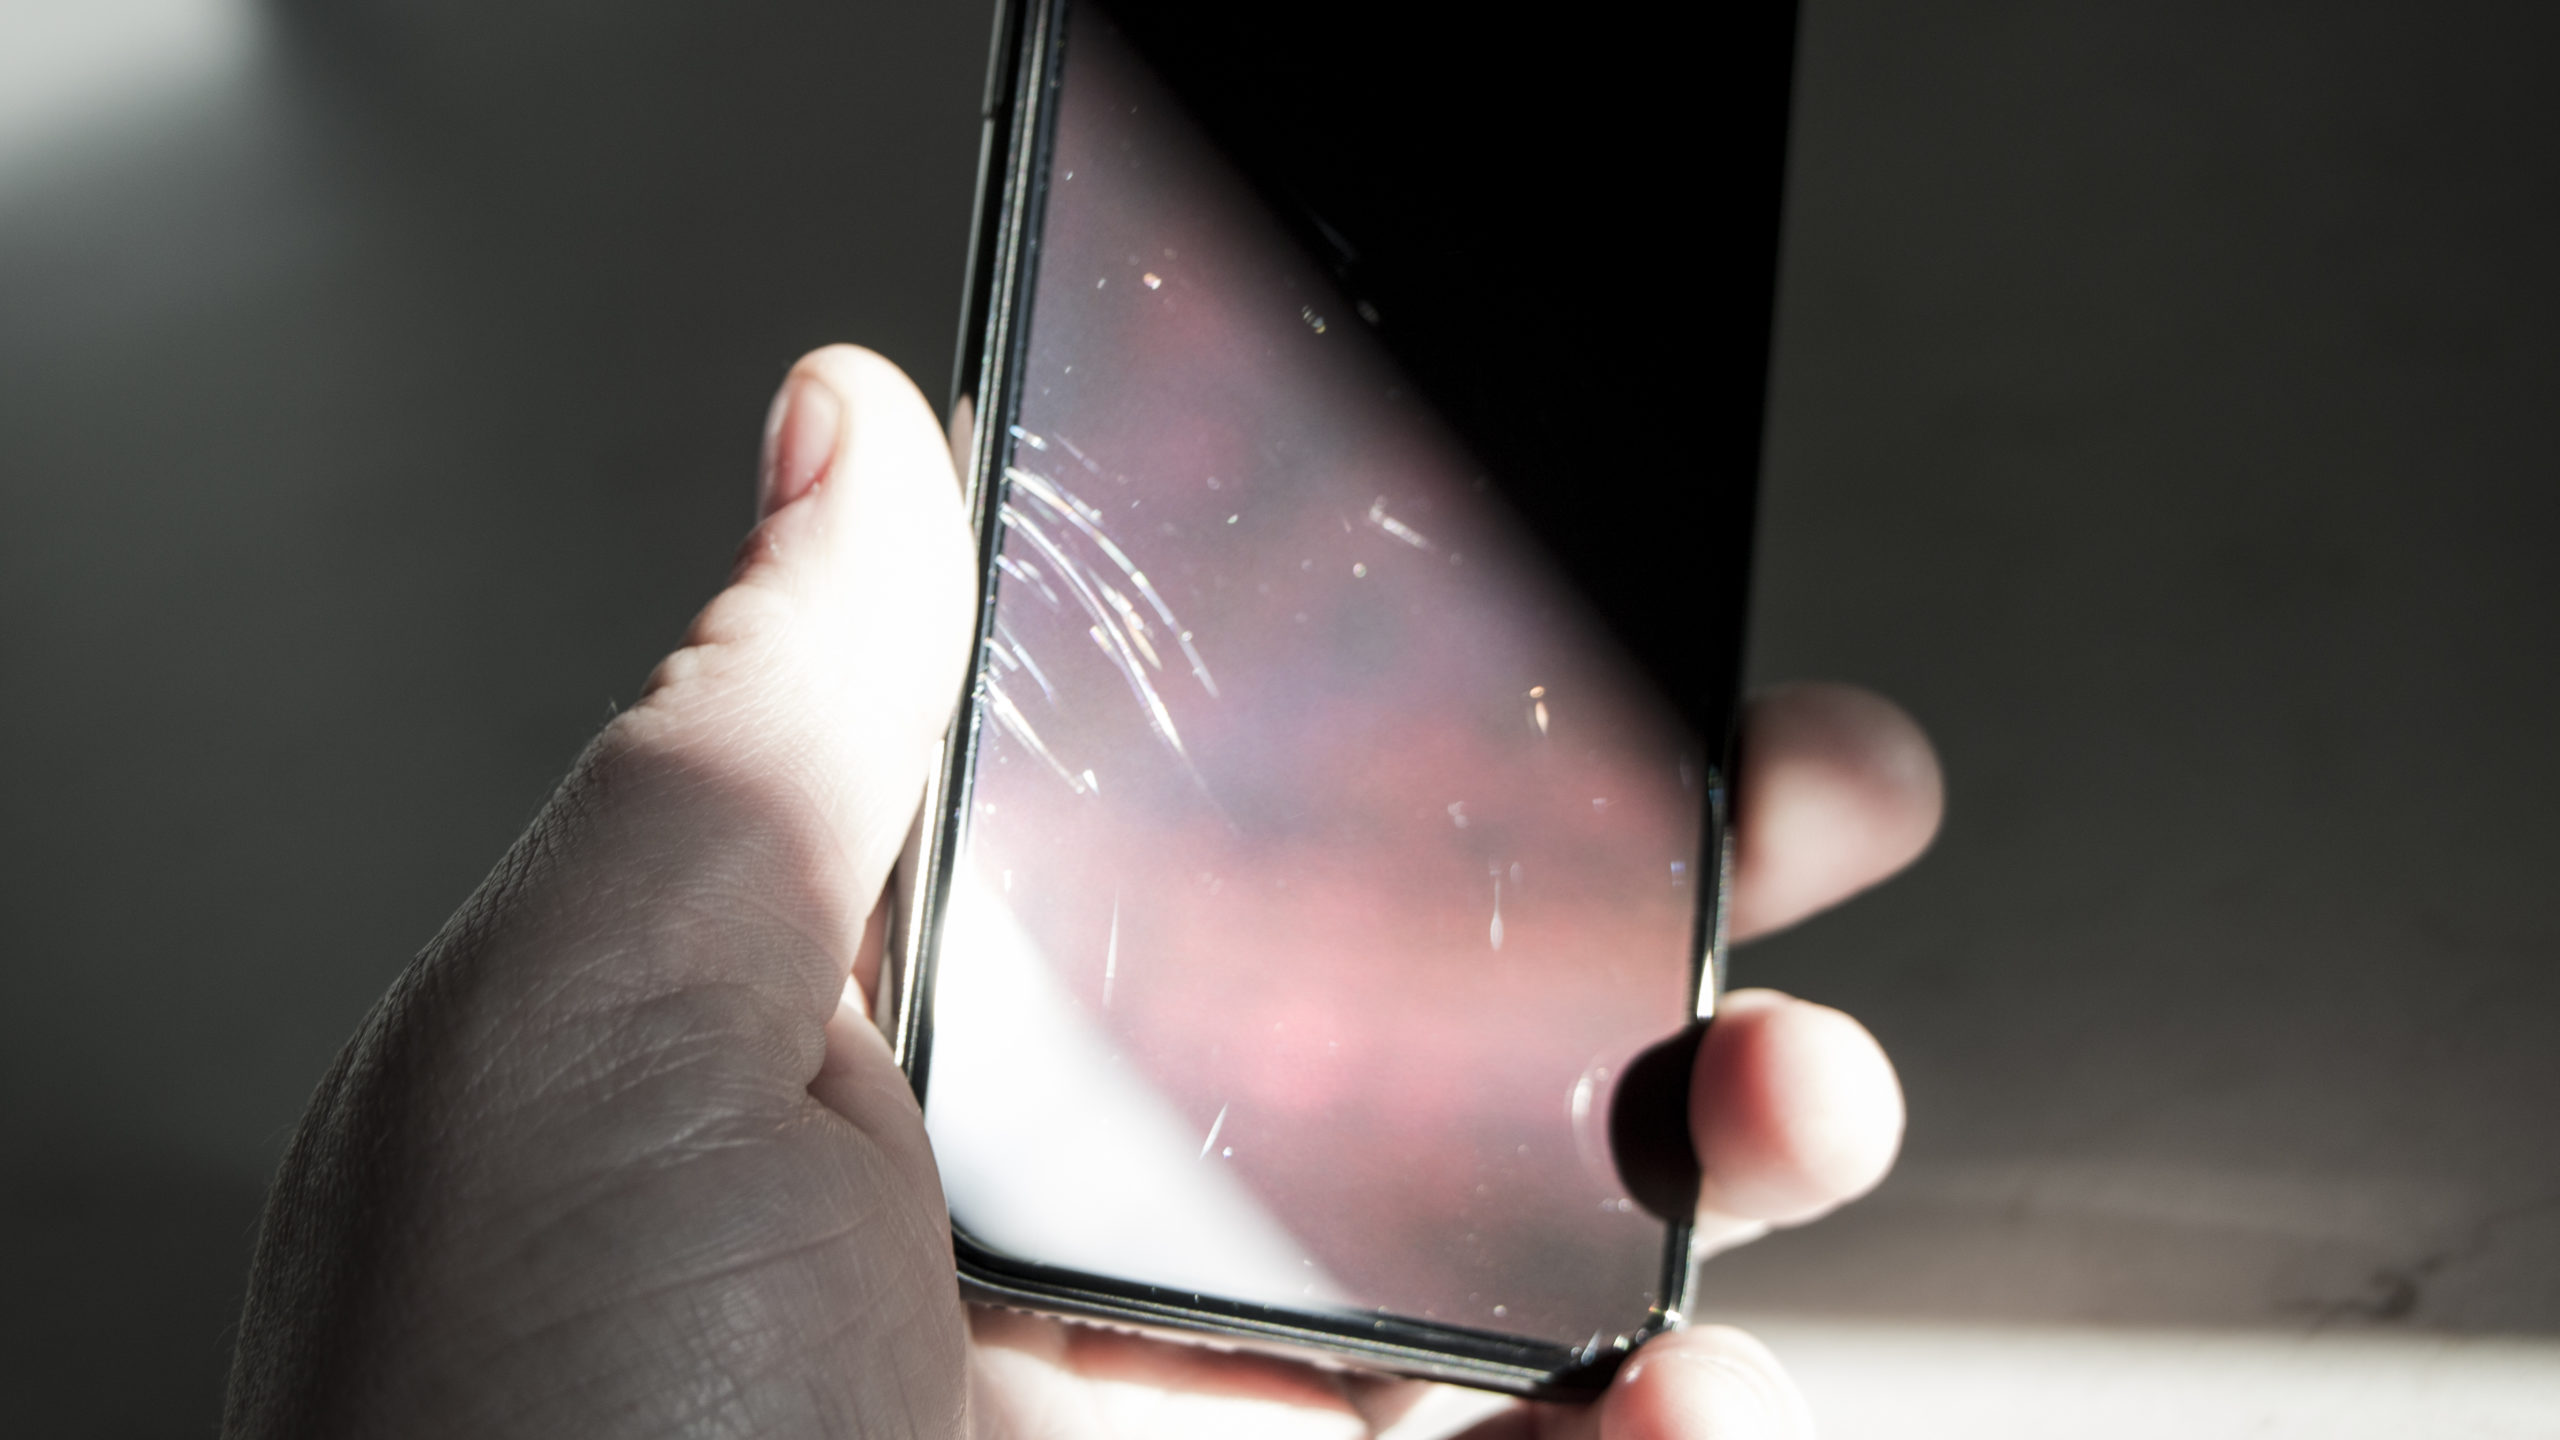 iPhone X Damage Report: Two Months Later